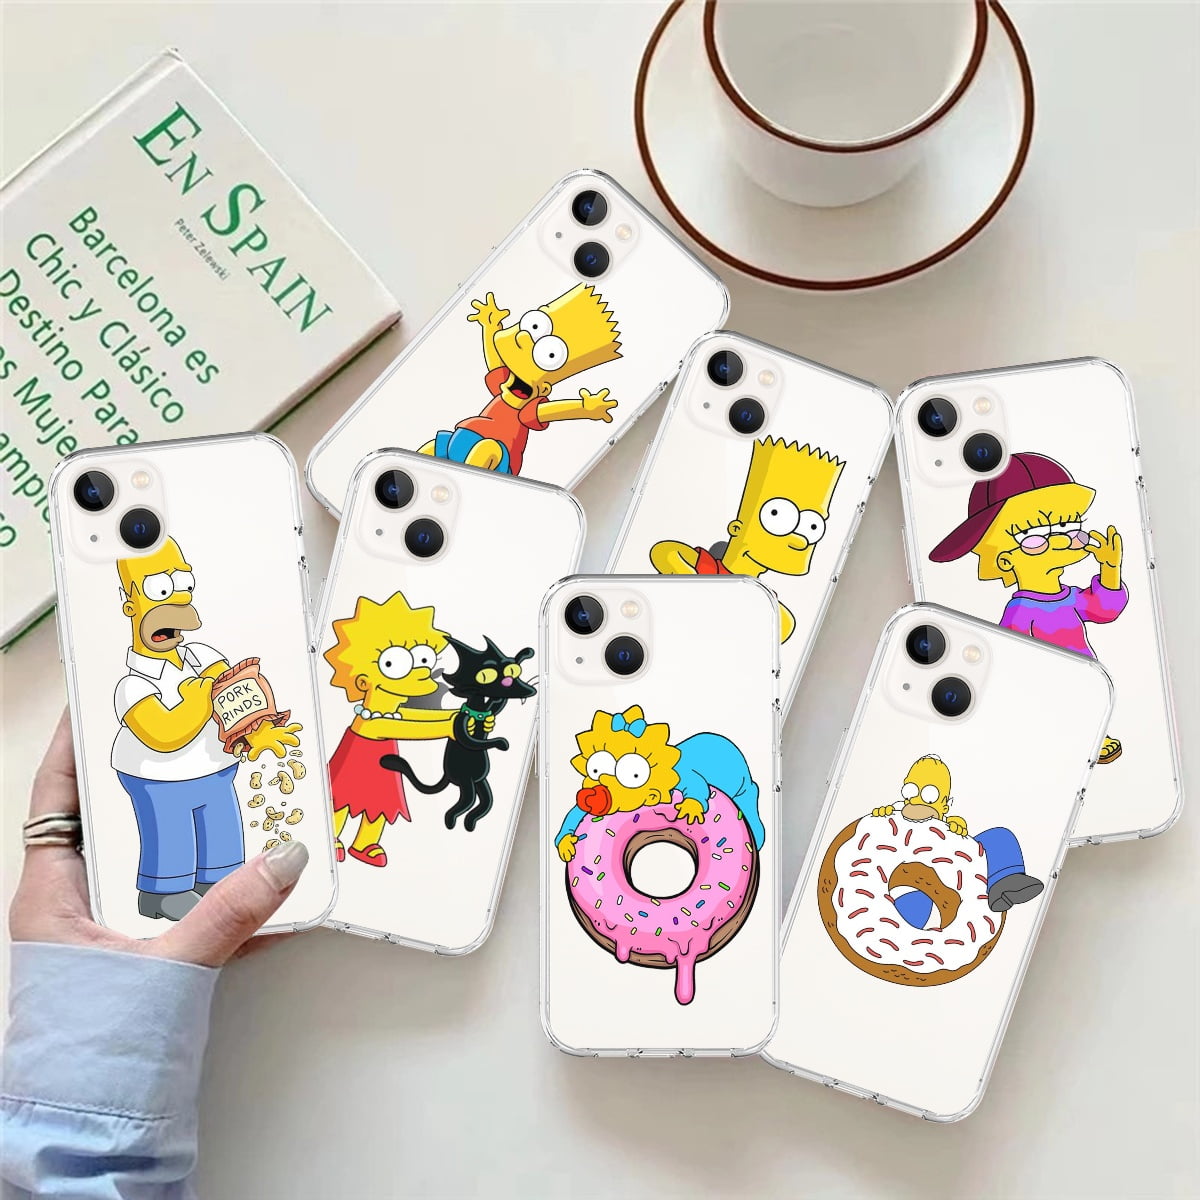 Simpson Family Funny Silicone Phonecase For Iphone 13,13 Pro  Max,12,12promax For Iphone11,11 Pro,11 Pro Max,6 Plus/6s Plus,For Iphone 5/ 5s/Se,7 Plus/8 Plus,For Samsung Note 20, For Samsung Note 20 